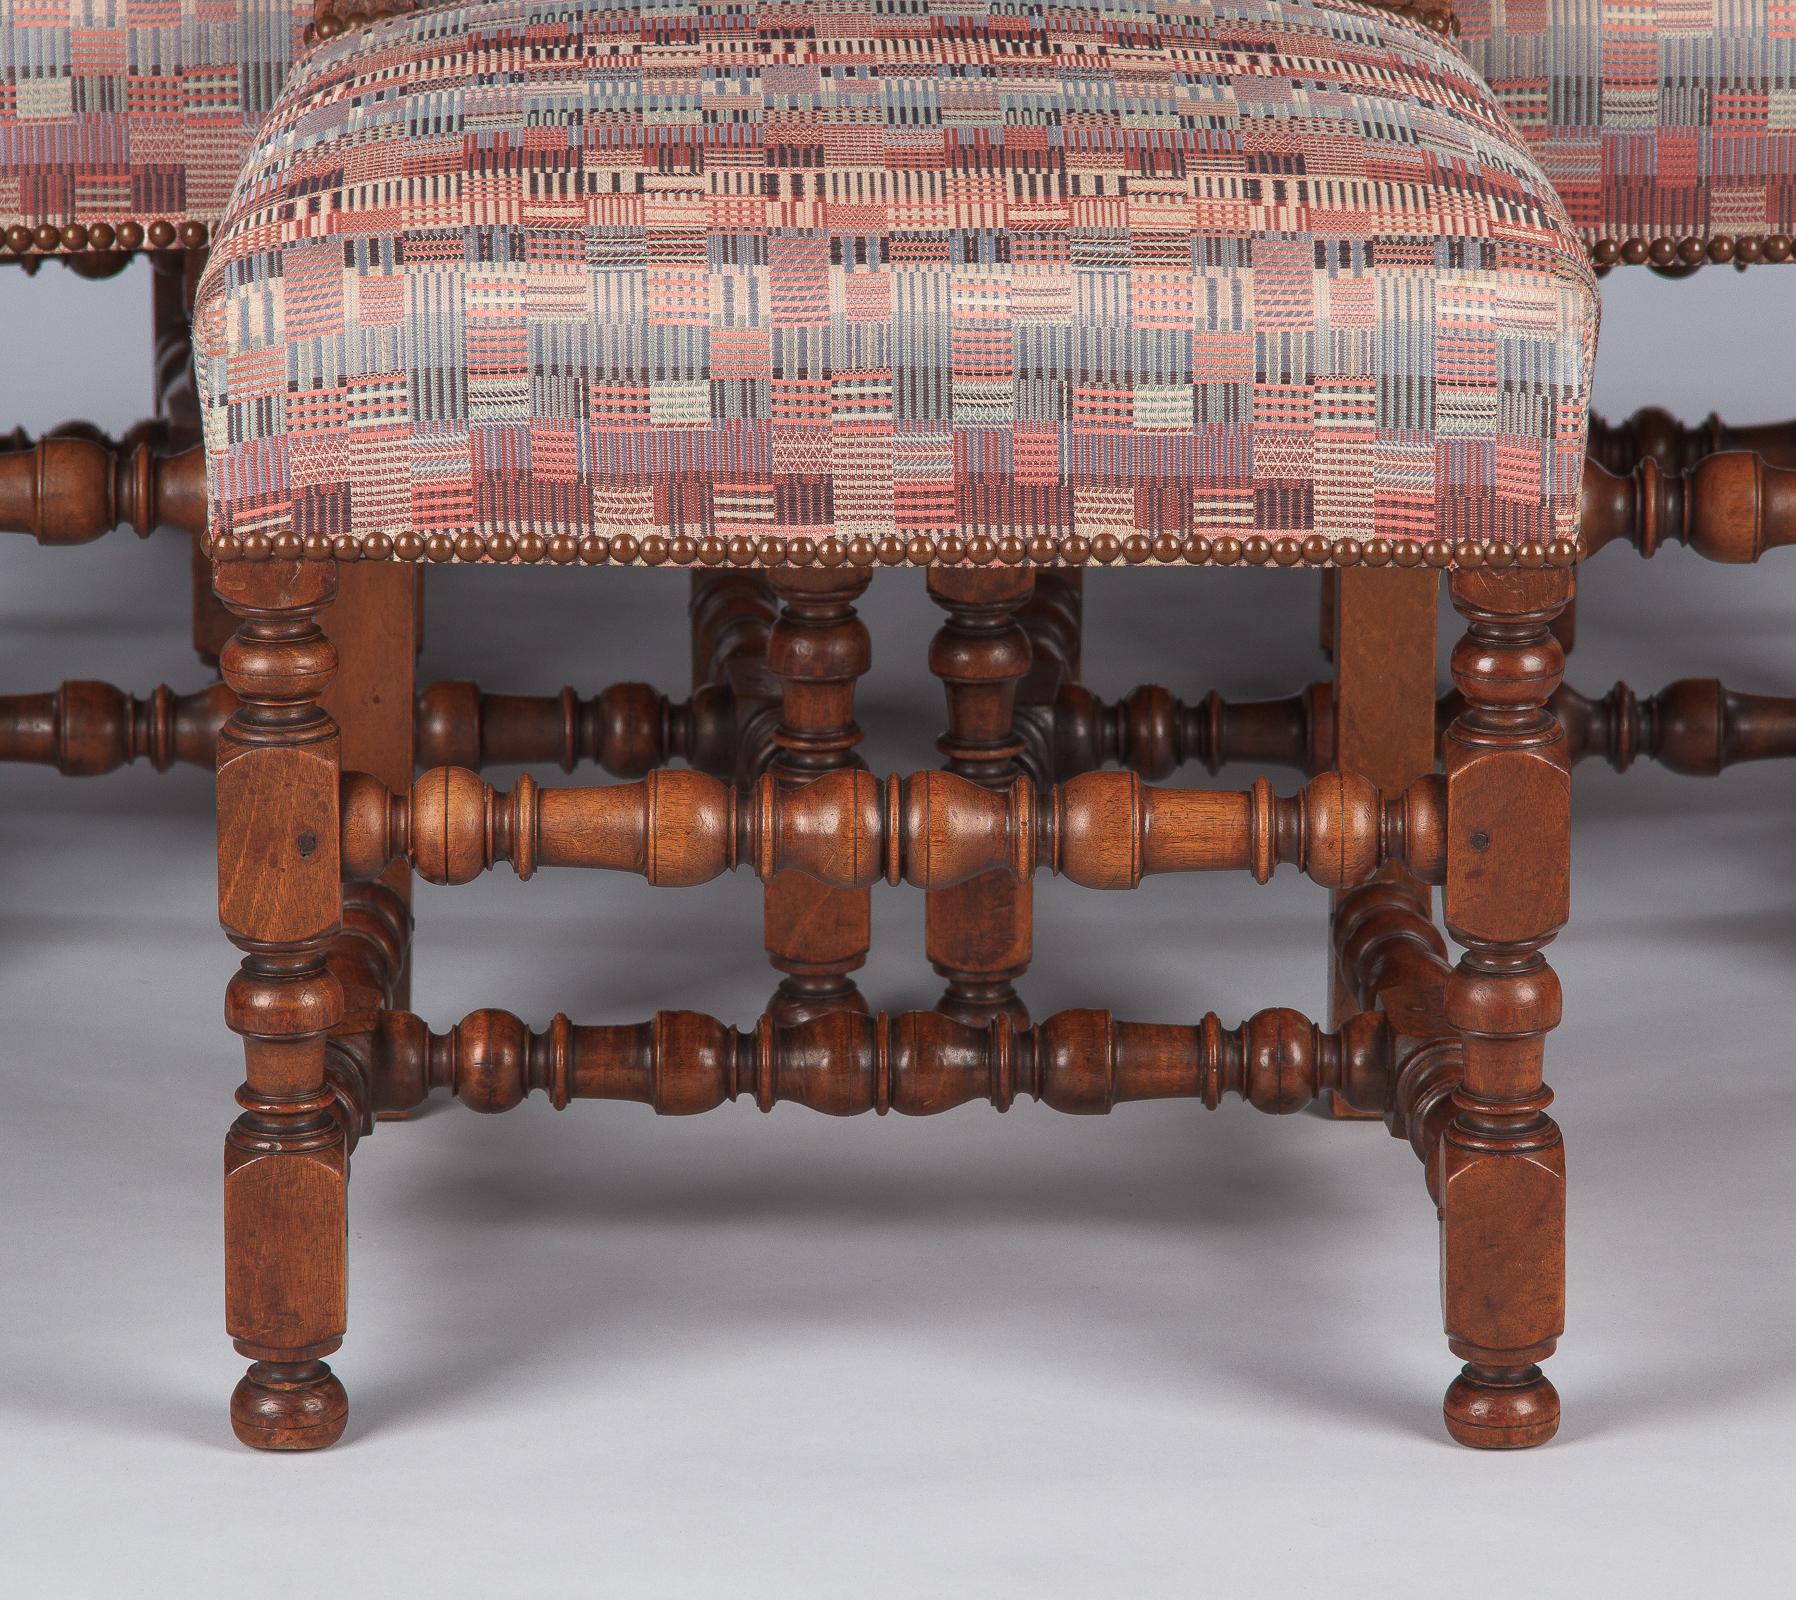 Set of 6 French Louis XIII Style Upholstered Walnut Chairs, 1920s (20. Jahrhundert)